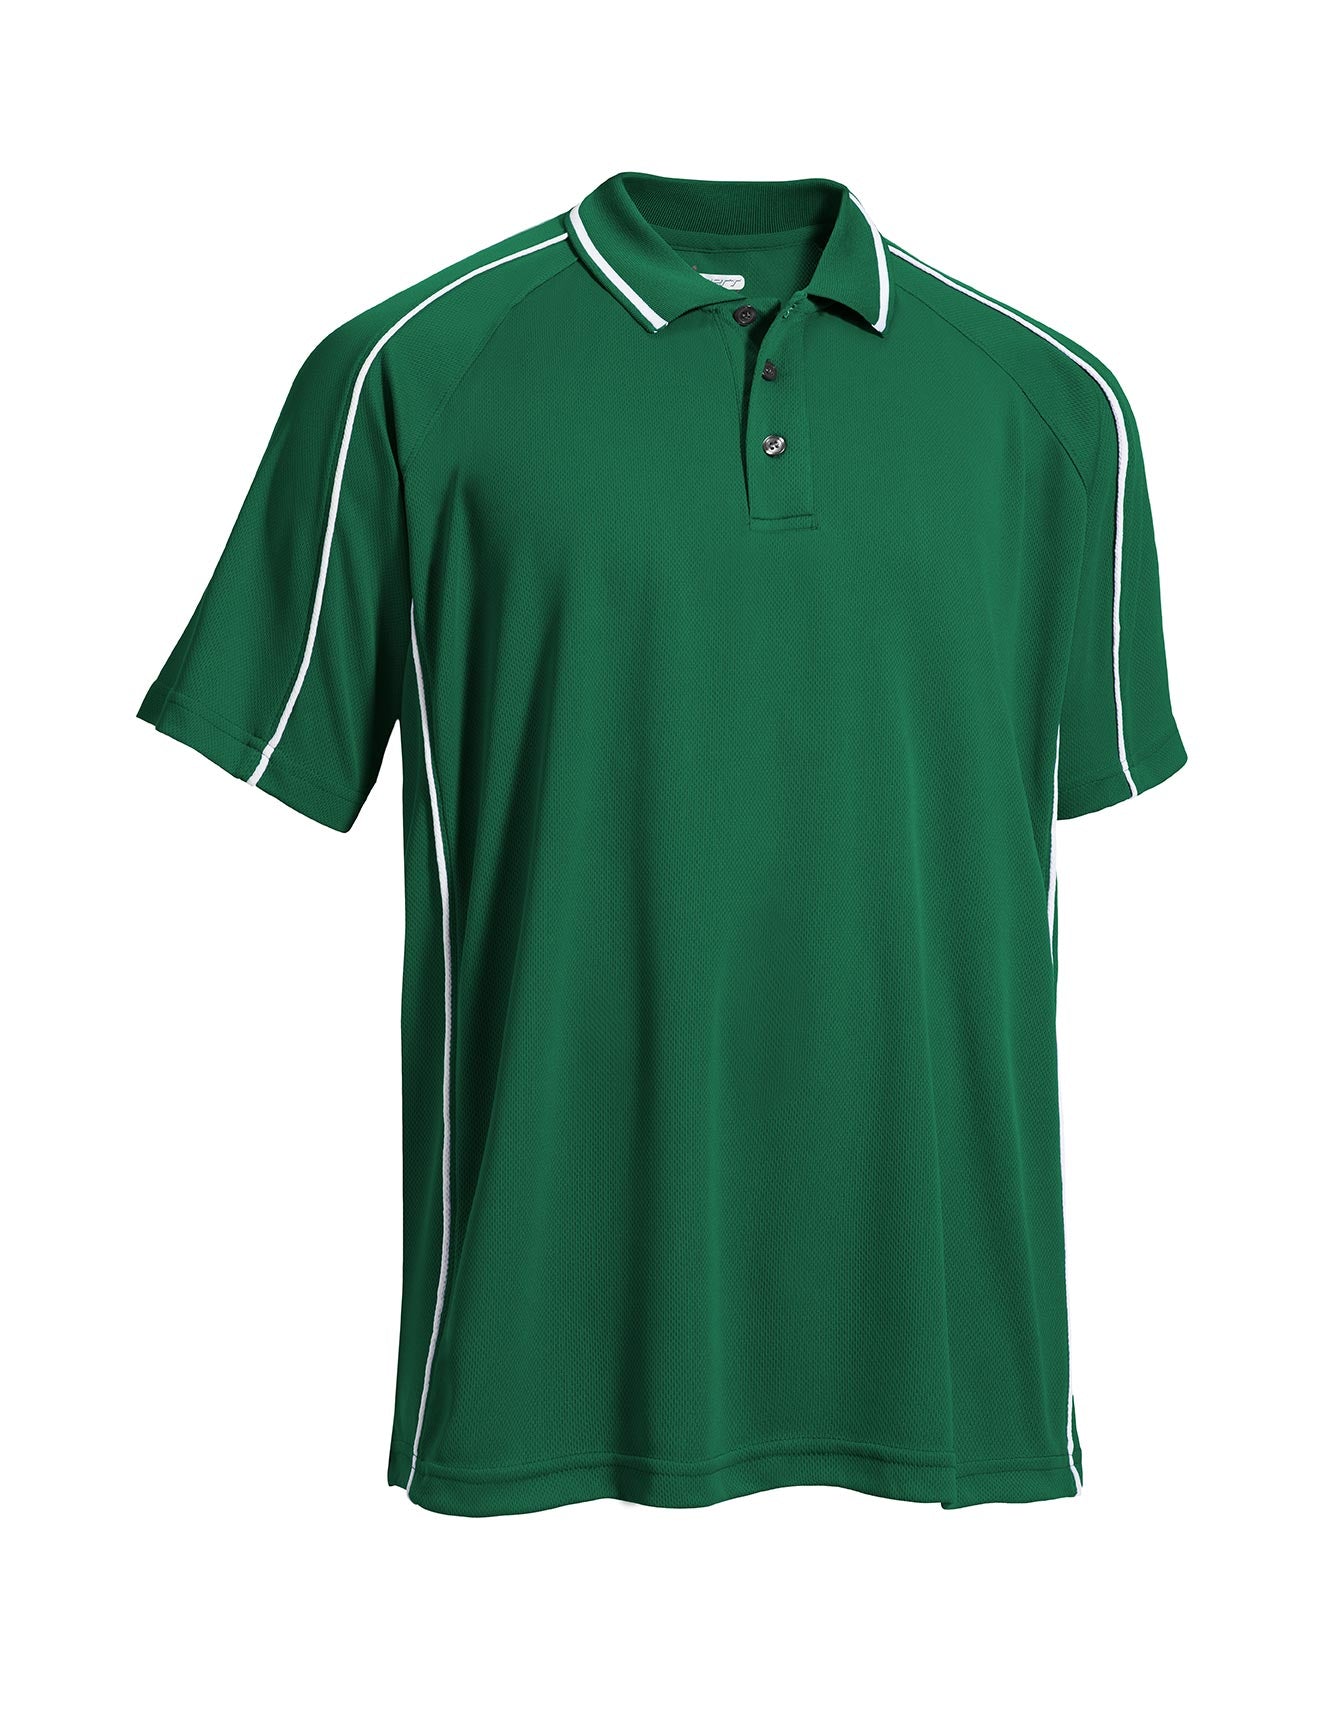 Expert Brand Wholesale Blank Activewear Men's Polo Golf Tennis Malibu Forest Green White Piping#forest-green